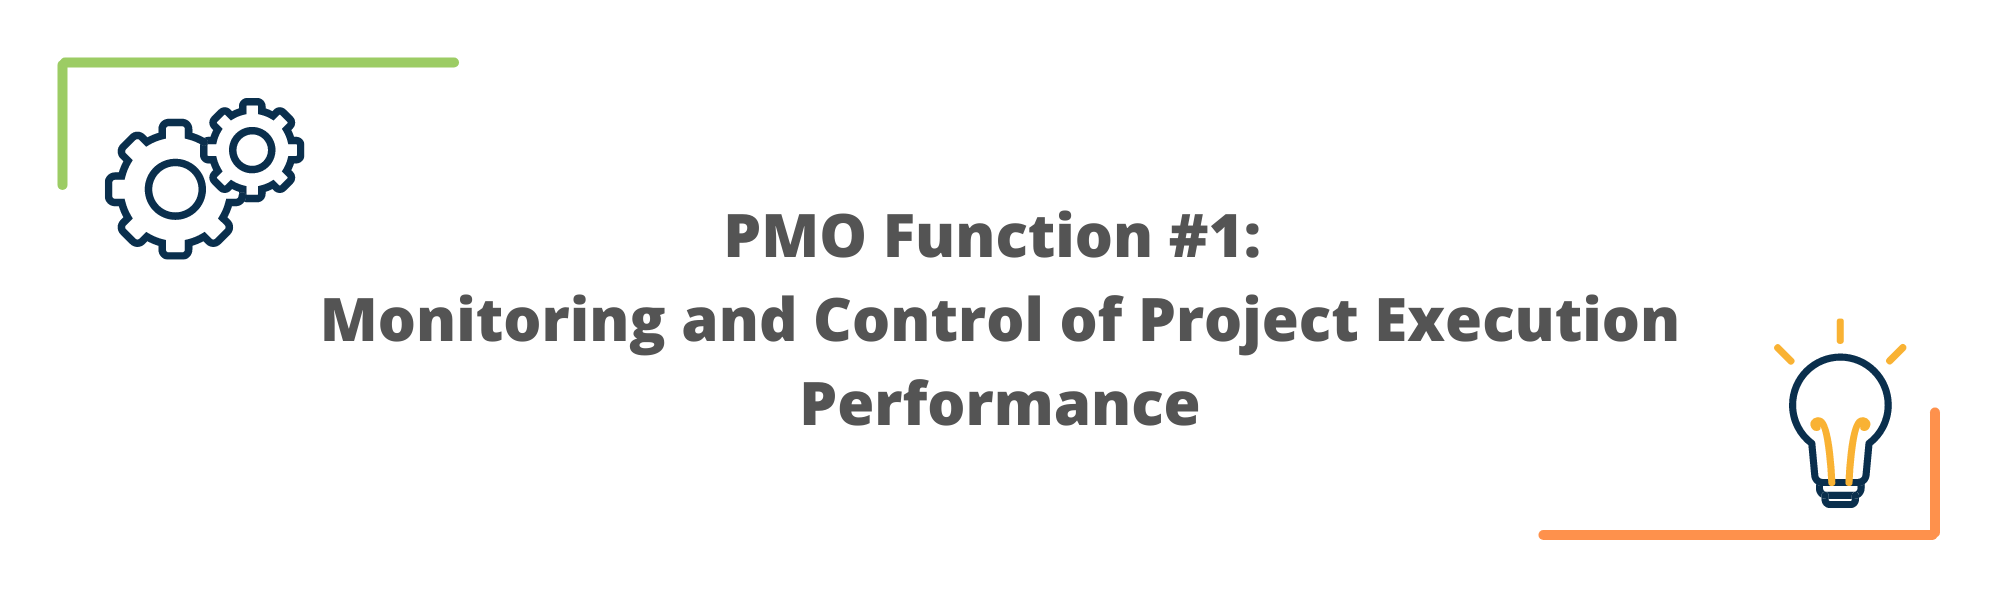 Monitoring and Control of Project Execution Performance